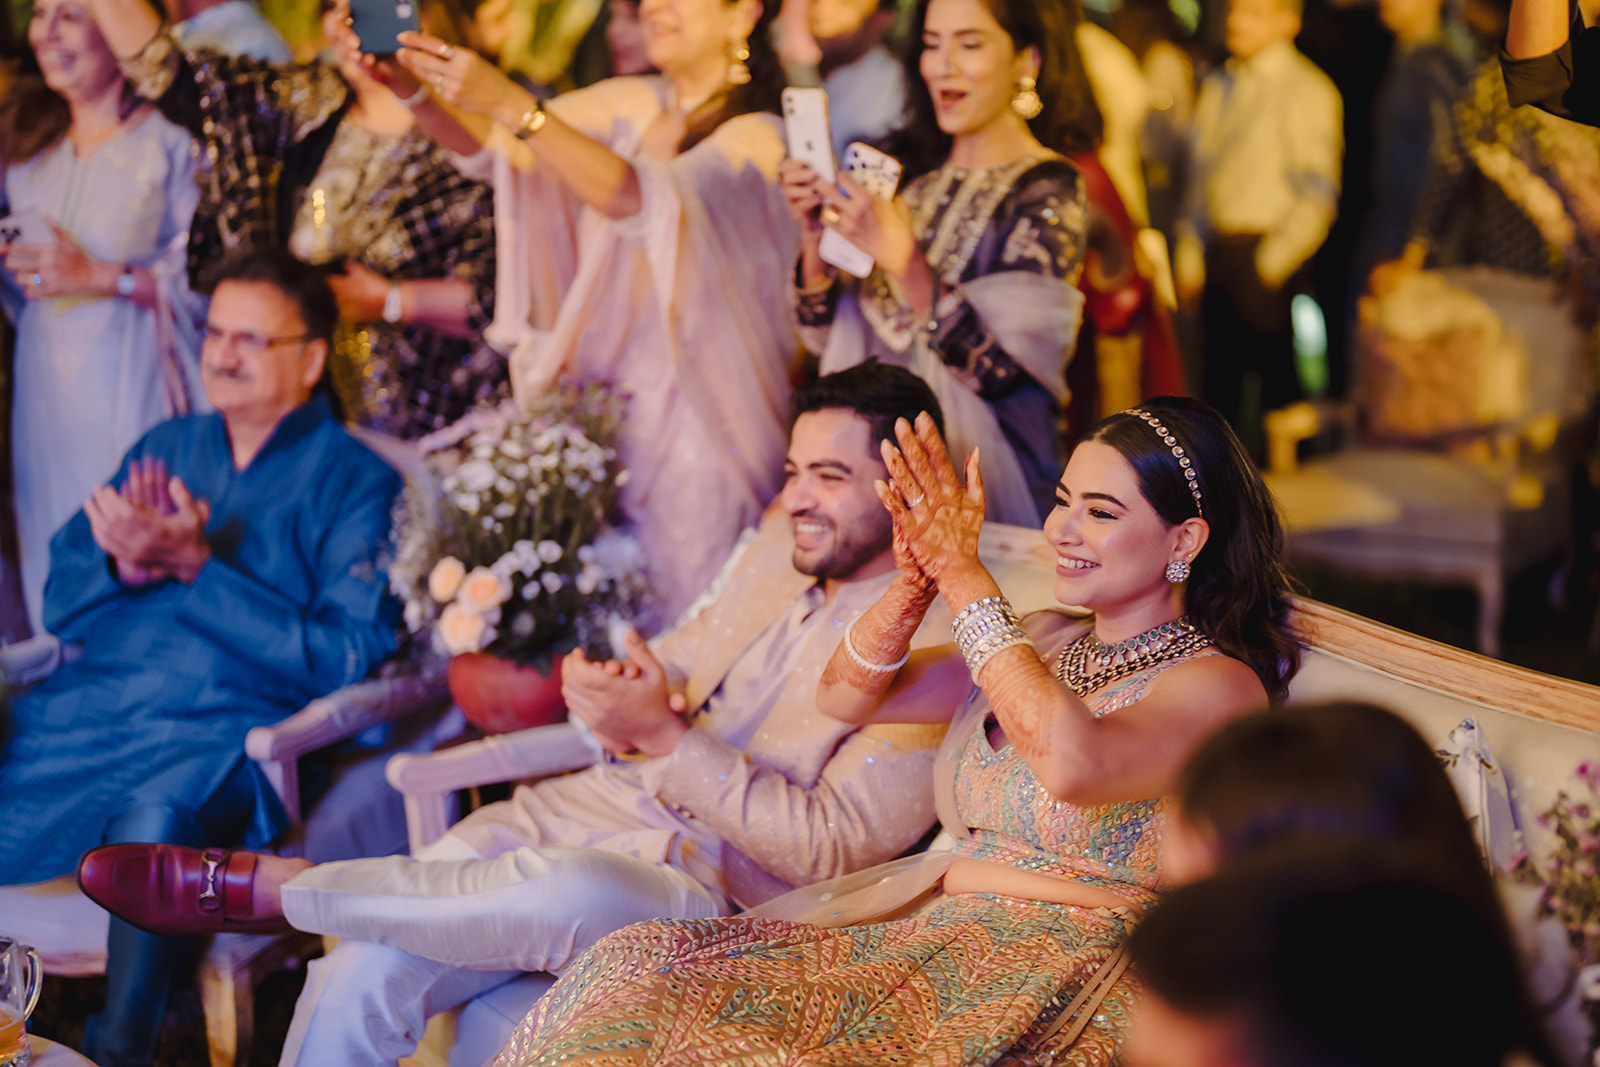 Dancing with love: Bride and groom relishing the festive atmosphere created by their guests